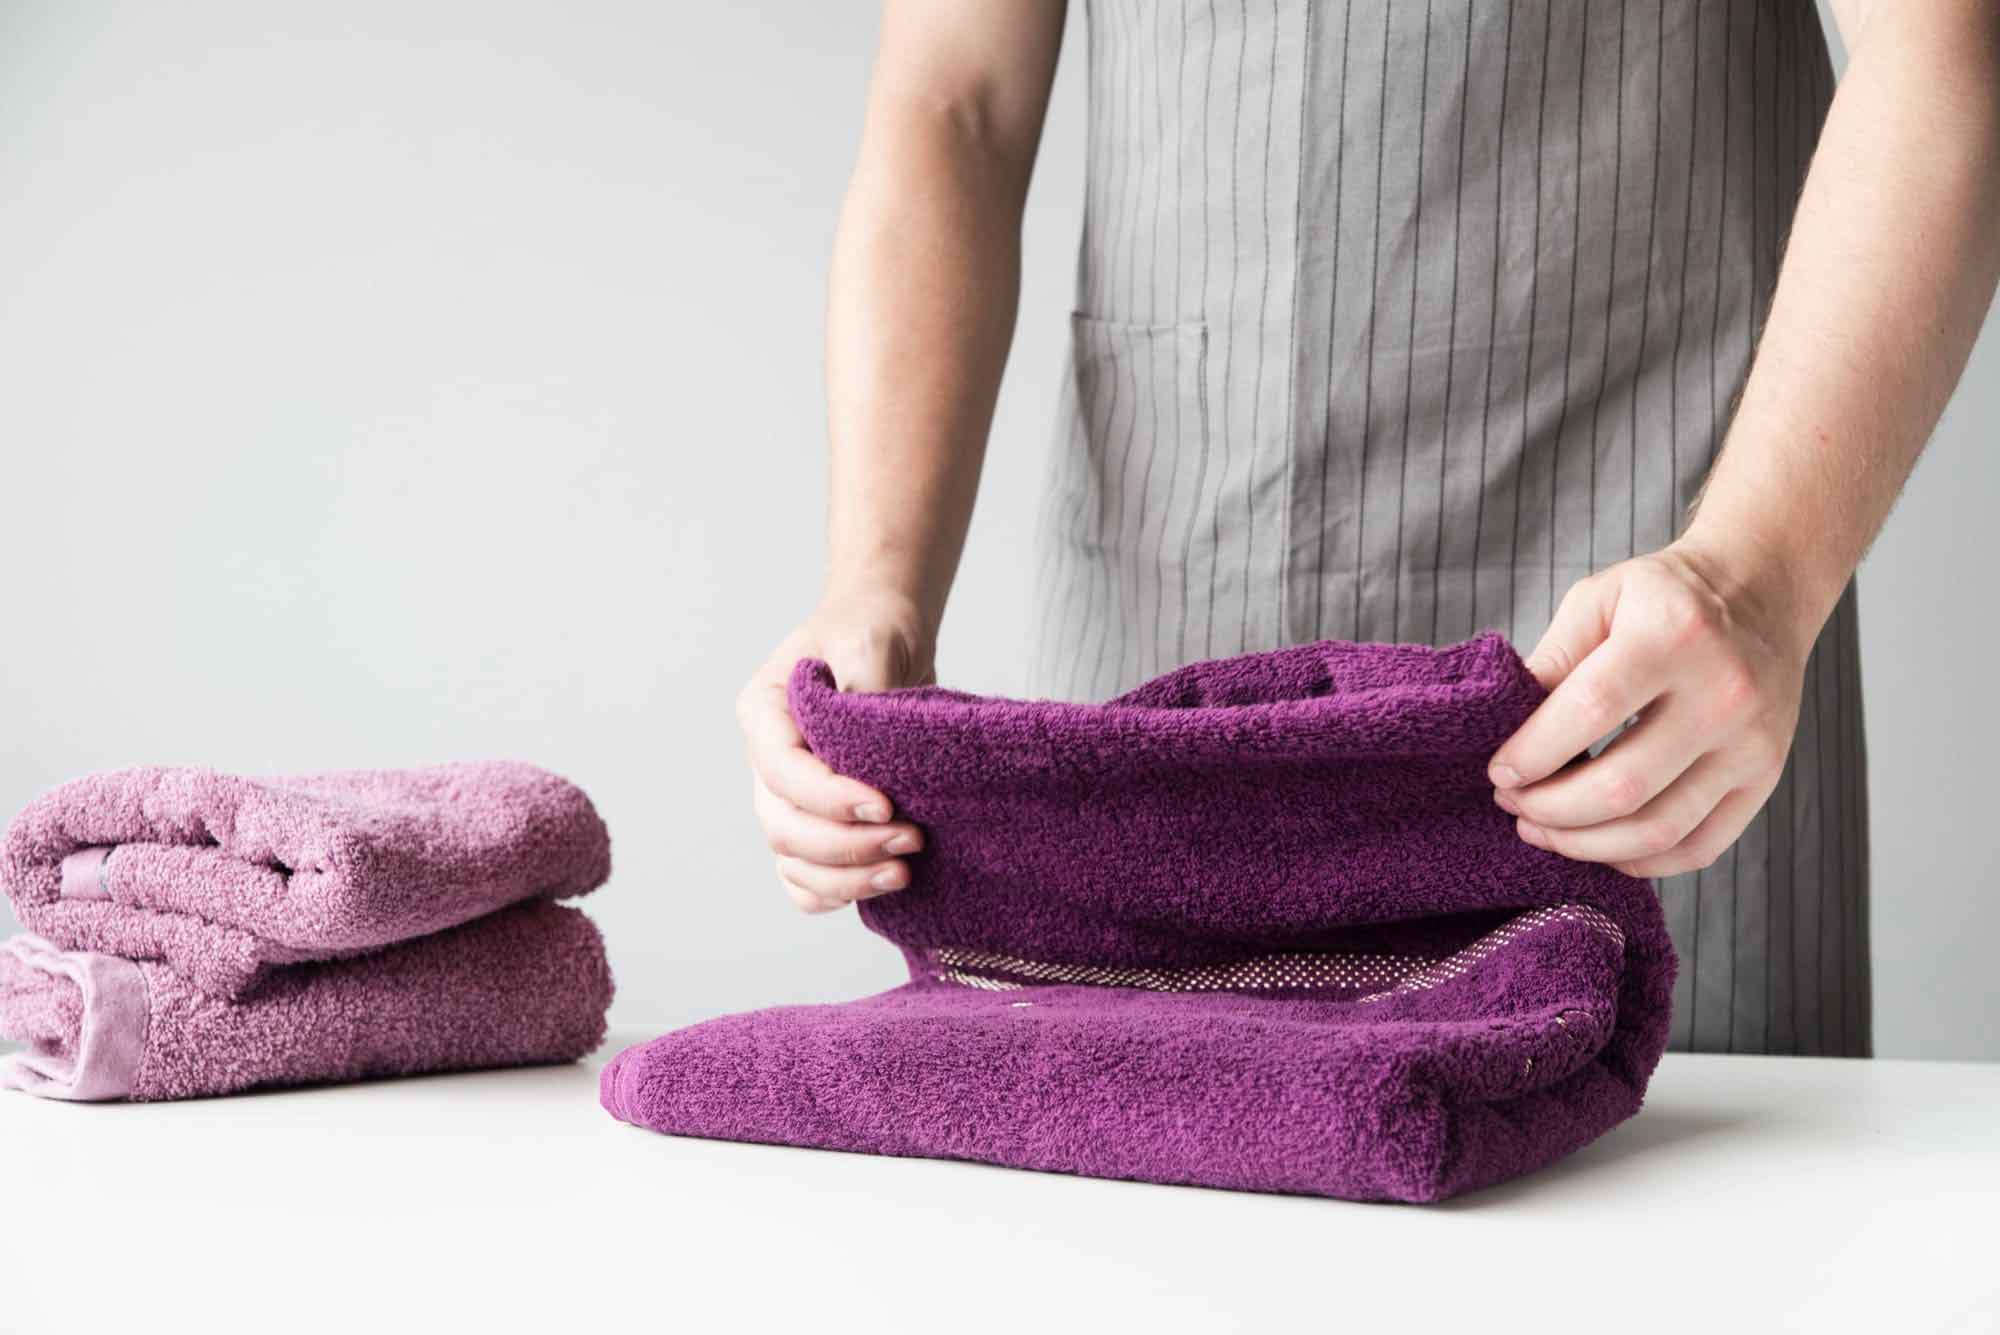 How to Fold Towels- A Guide for Every Design, Type, and Need